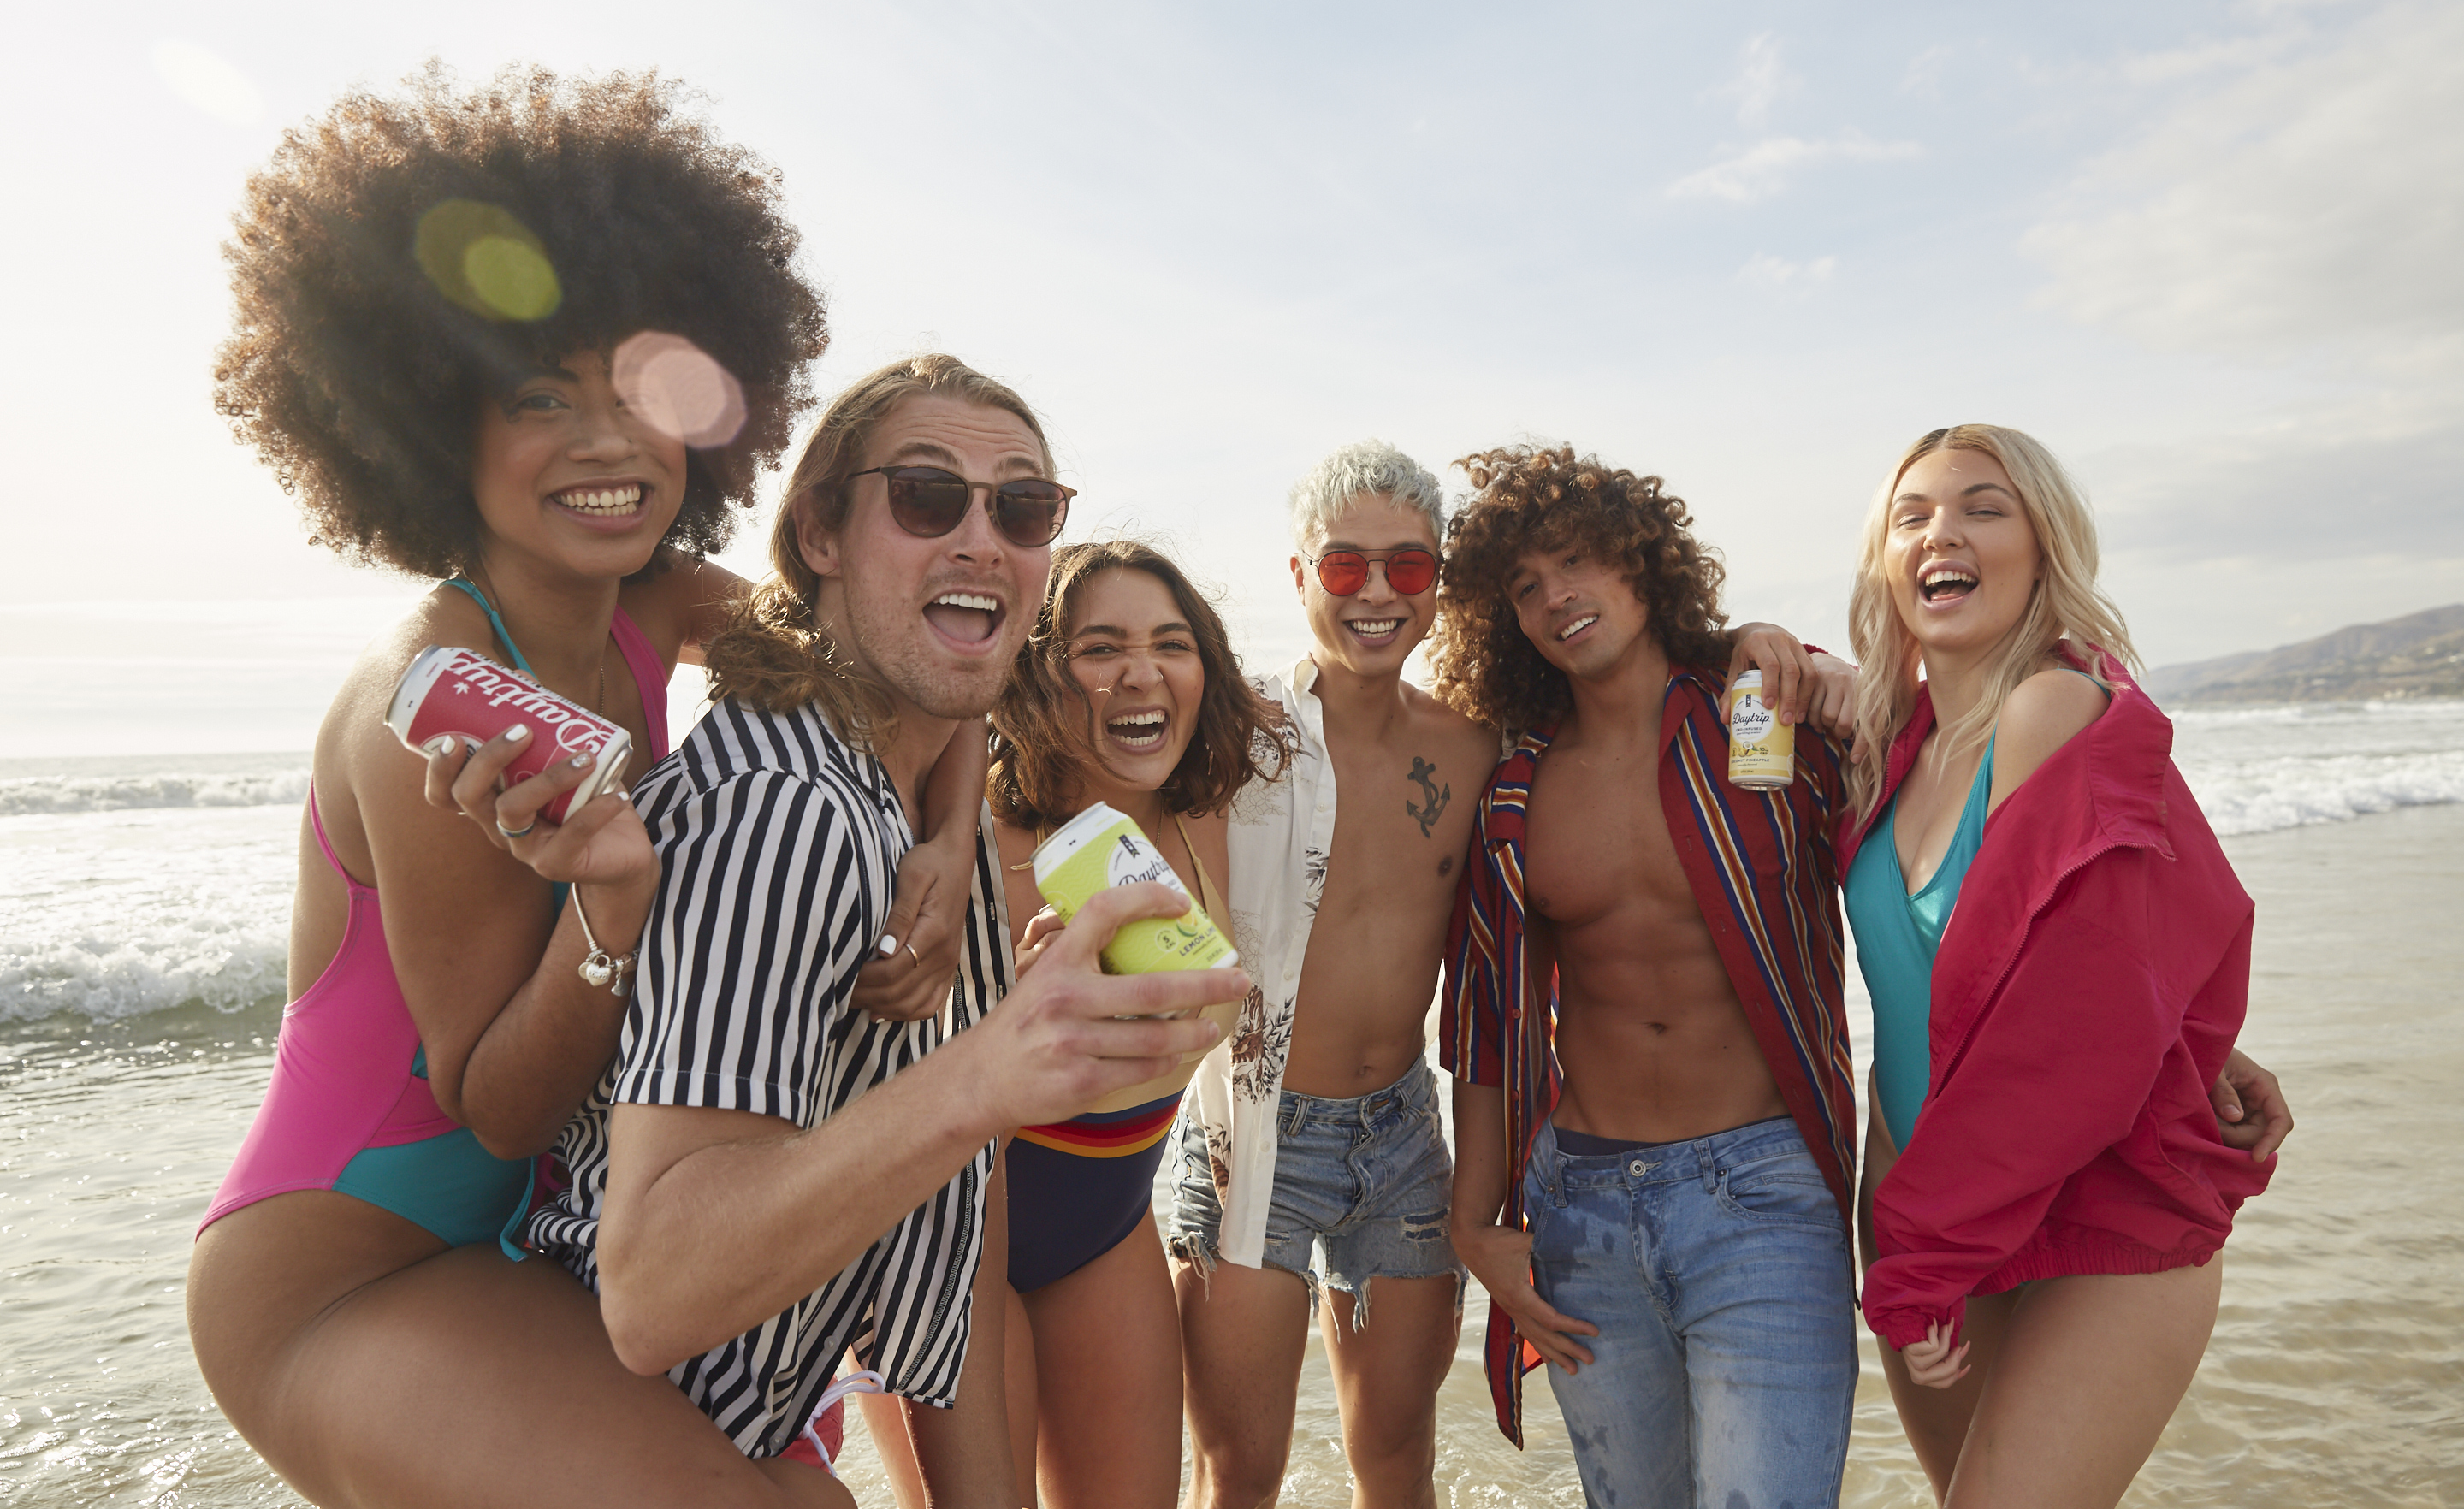 group photo of stylish young people holding cans of daytrip sparkling water on a los angeles beach